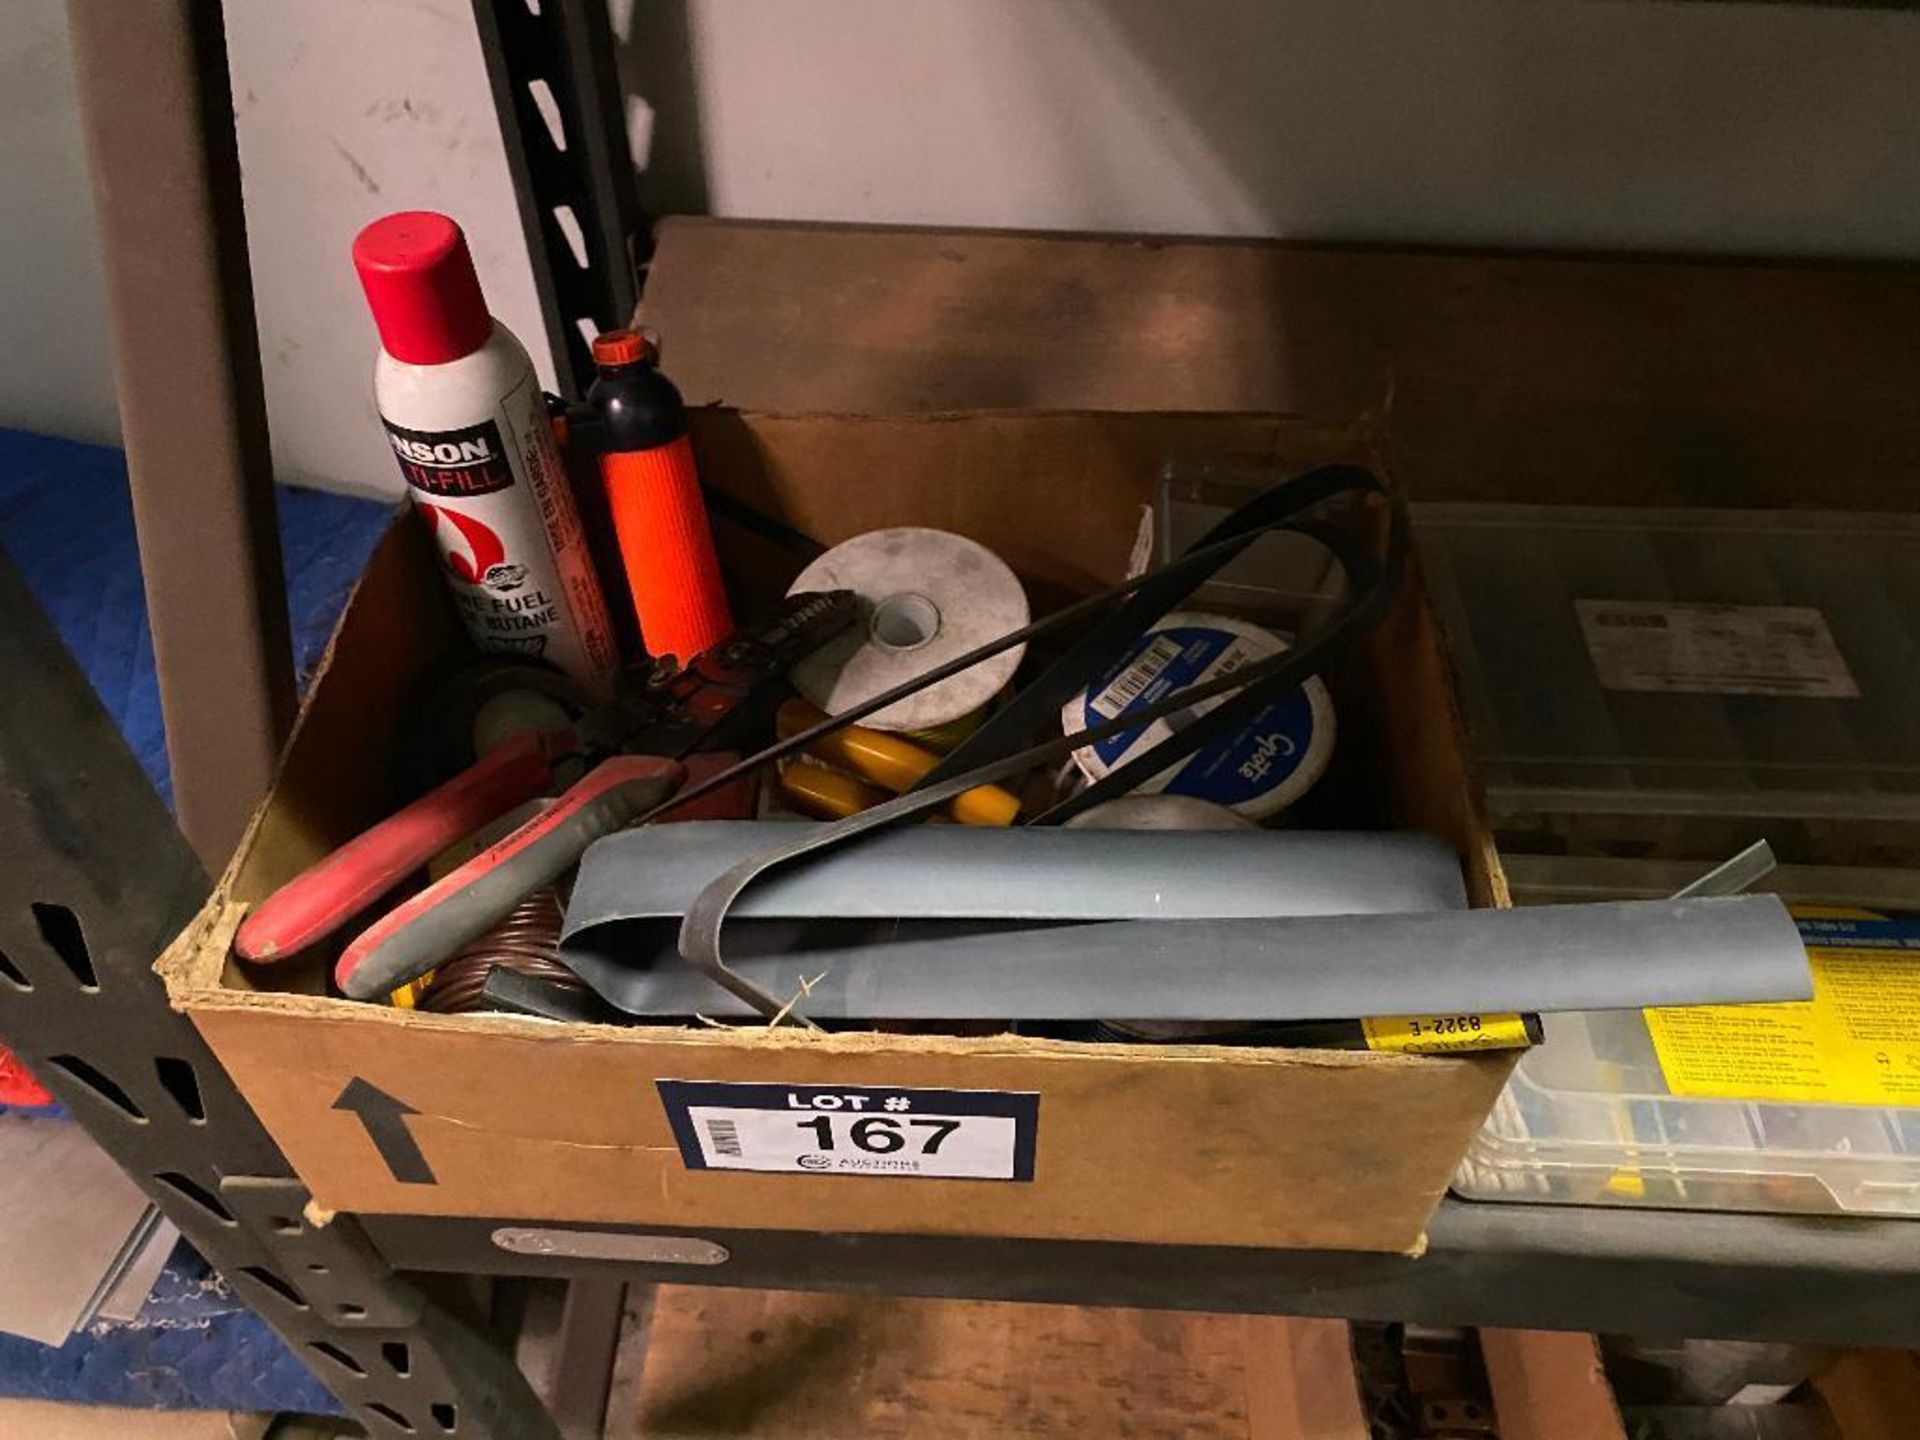 Lot of Asst. Electrical Wire, Heat Shrink, Torch, Wire Stripper, etc. - Image 2 of 3